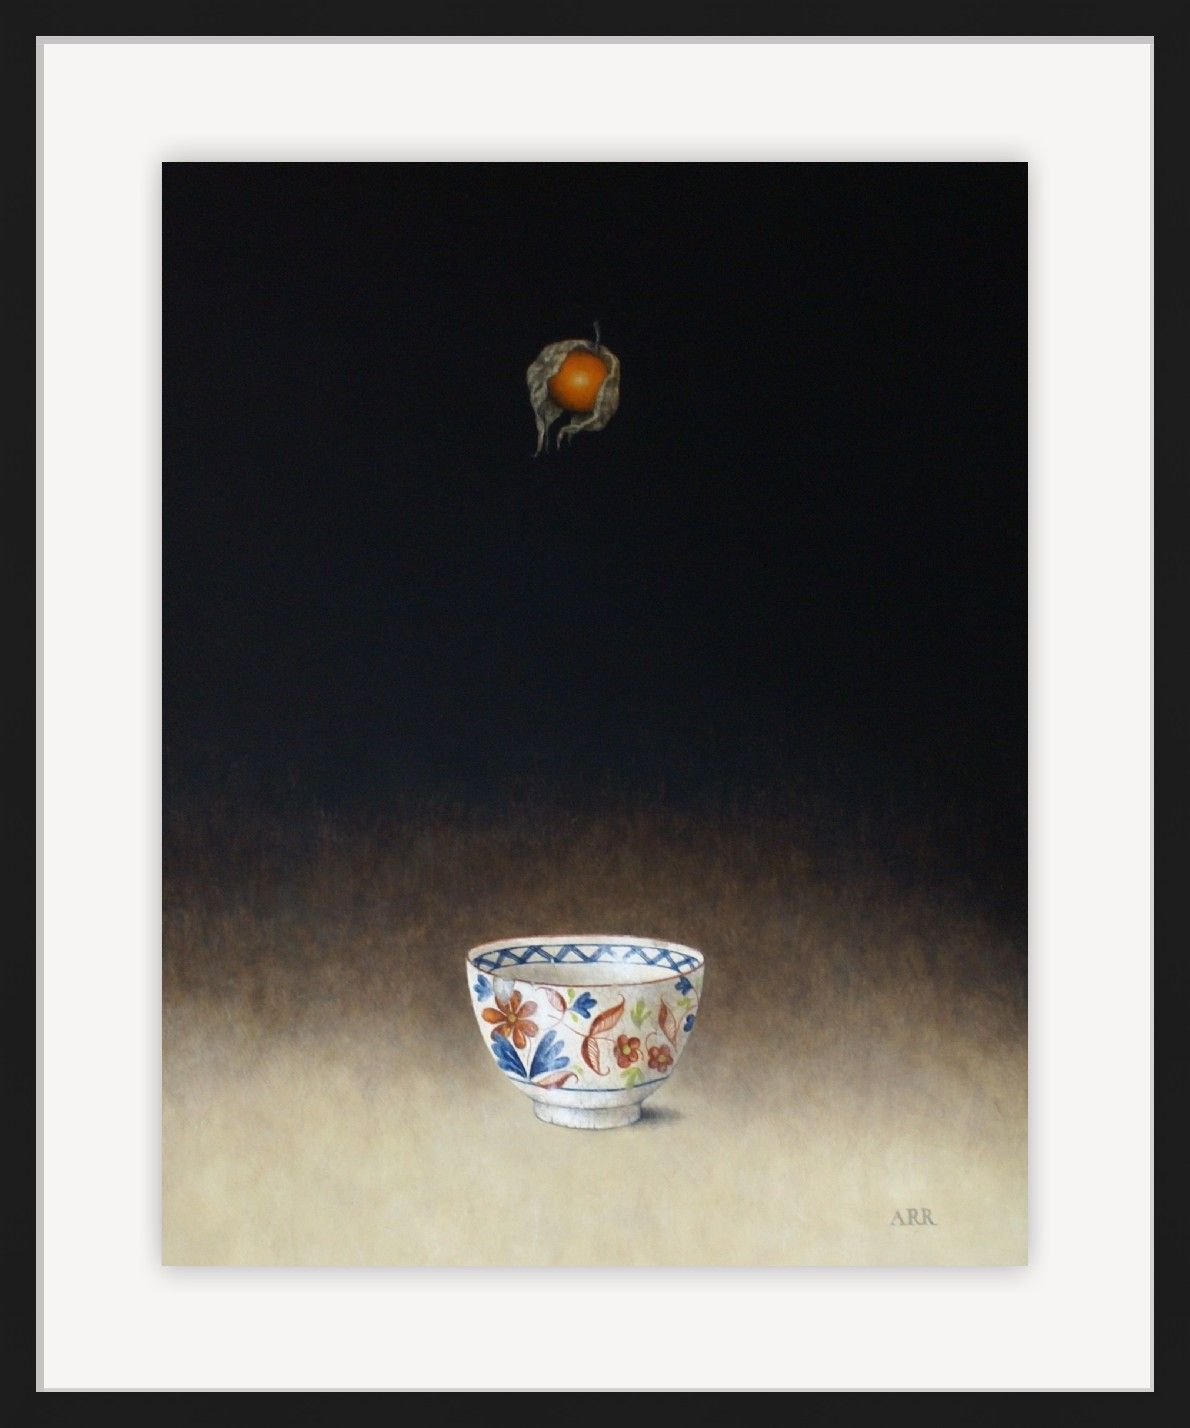 Chipped Bowl with Falling Physalis by Alison Rankin